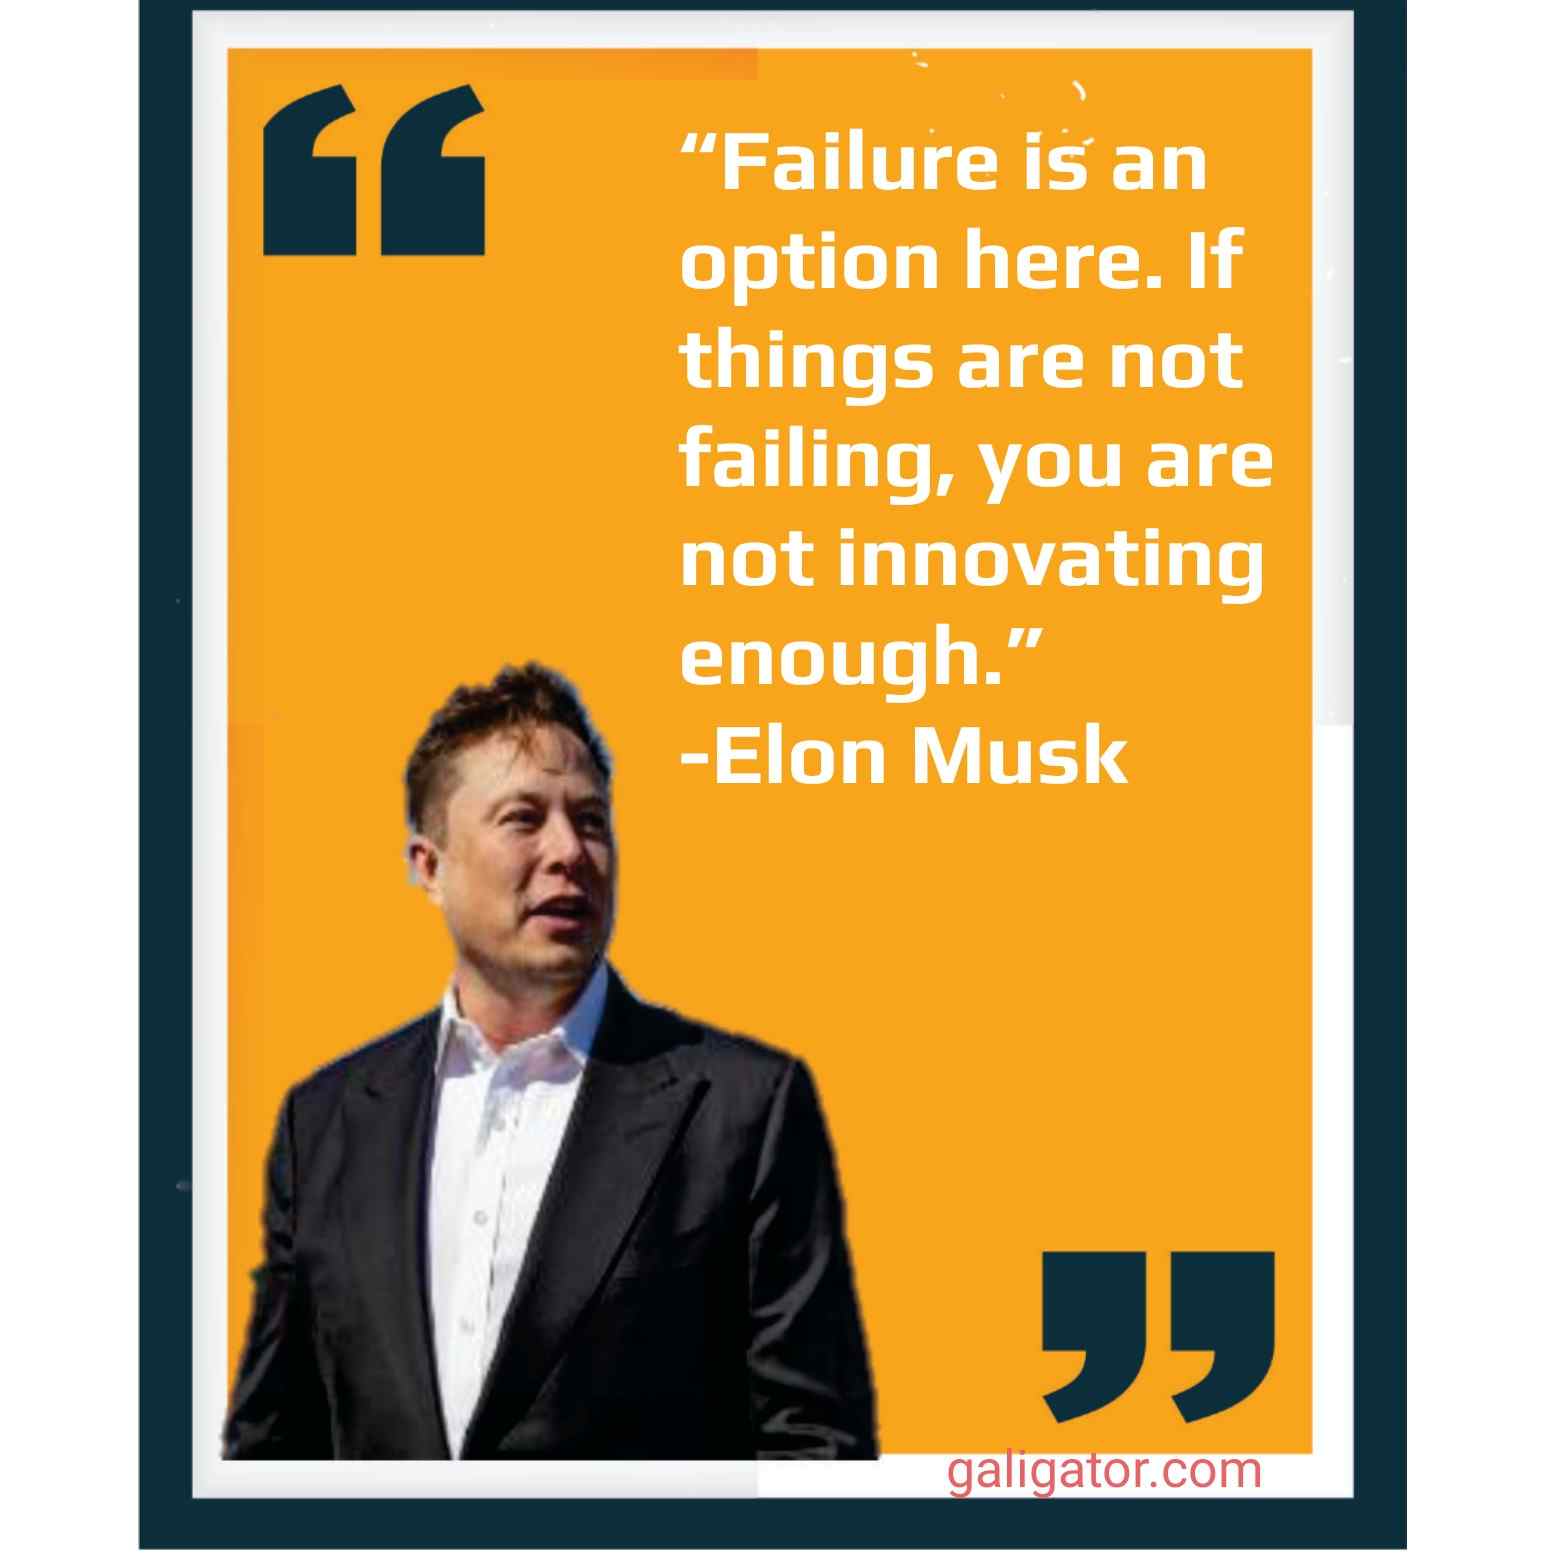  elon musk quotes, elon musk motivational quotes, elon musk quotes in hindi ,  wallpaper elon musk quotes,  elon musk motivational quotes in hindi , elon musk quotes wallpaper, elon musk inspirational quotes,  thoughts of elon musk